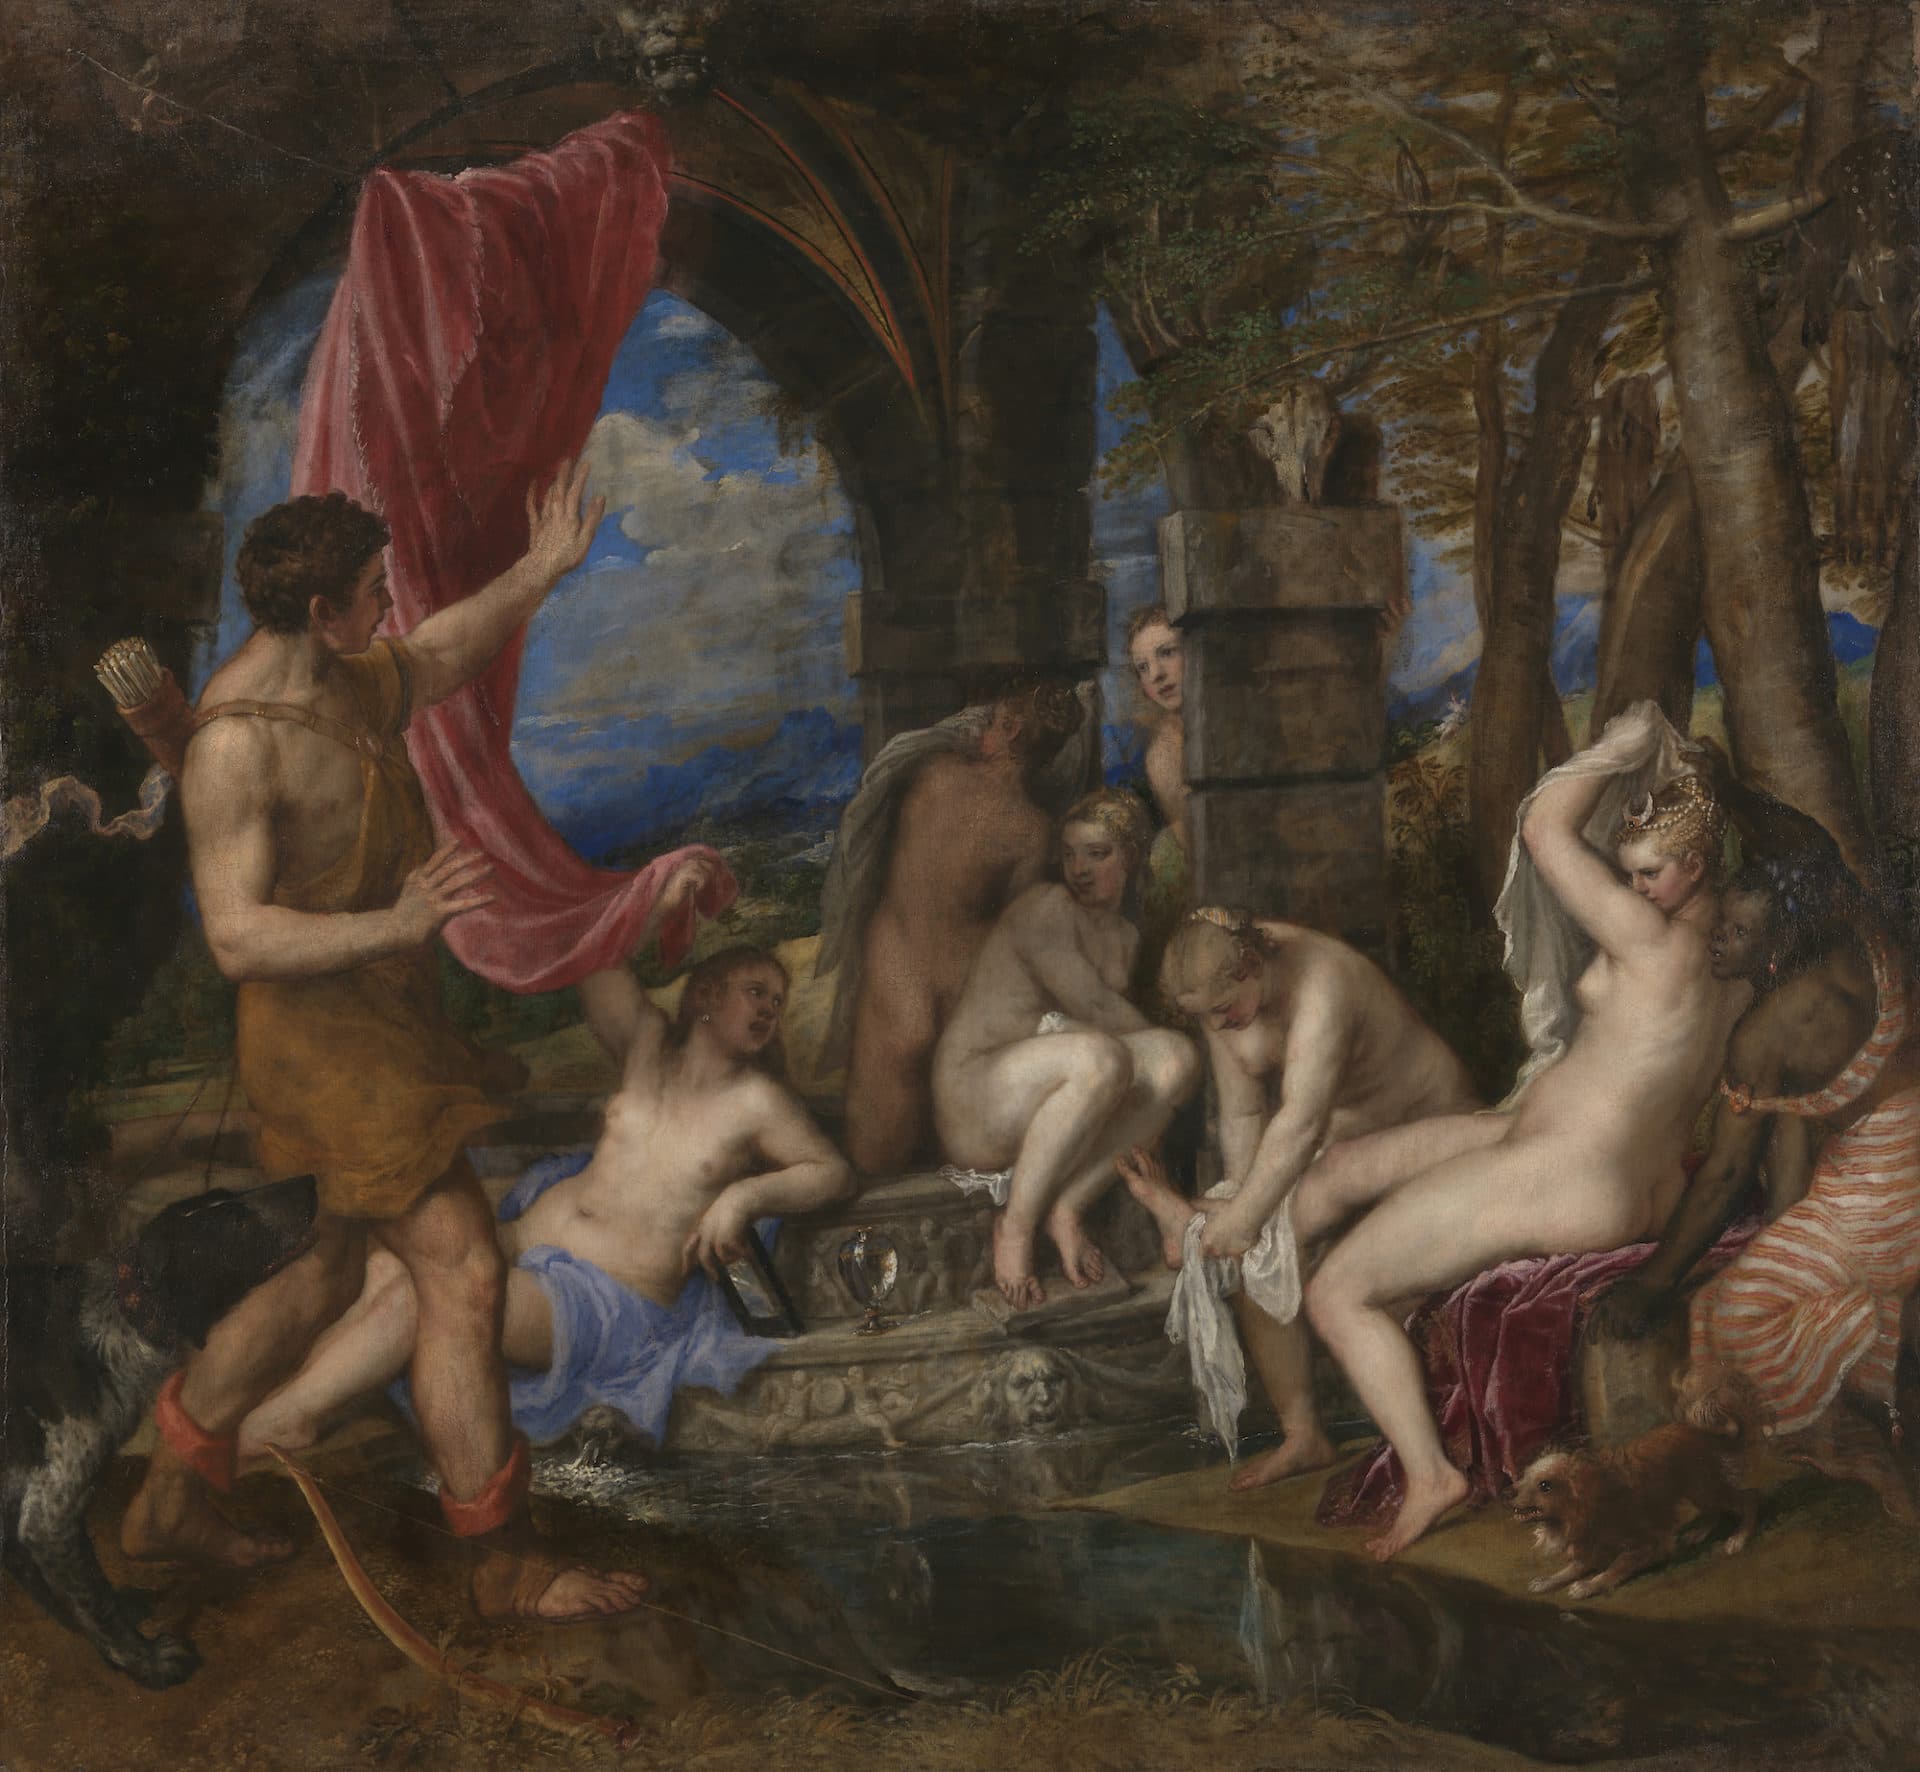 &quot;Diana and Actaeon&quot; painted by Titian between 1556 and 1559. (Courtesy The National Gallery, London)